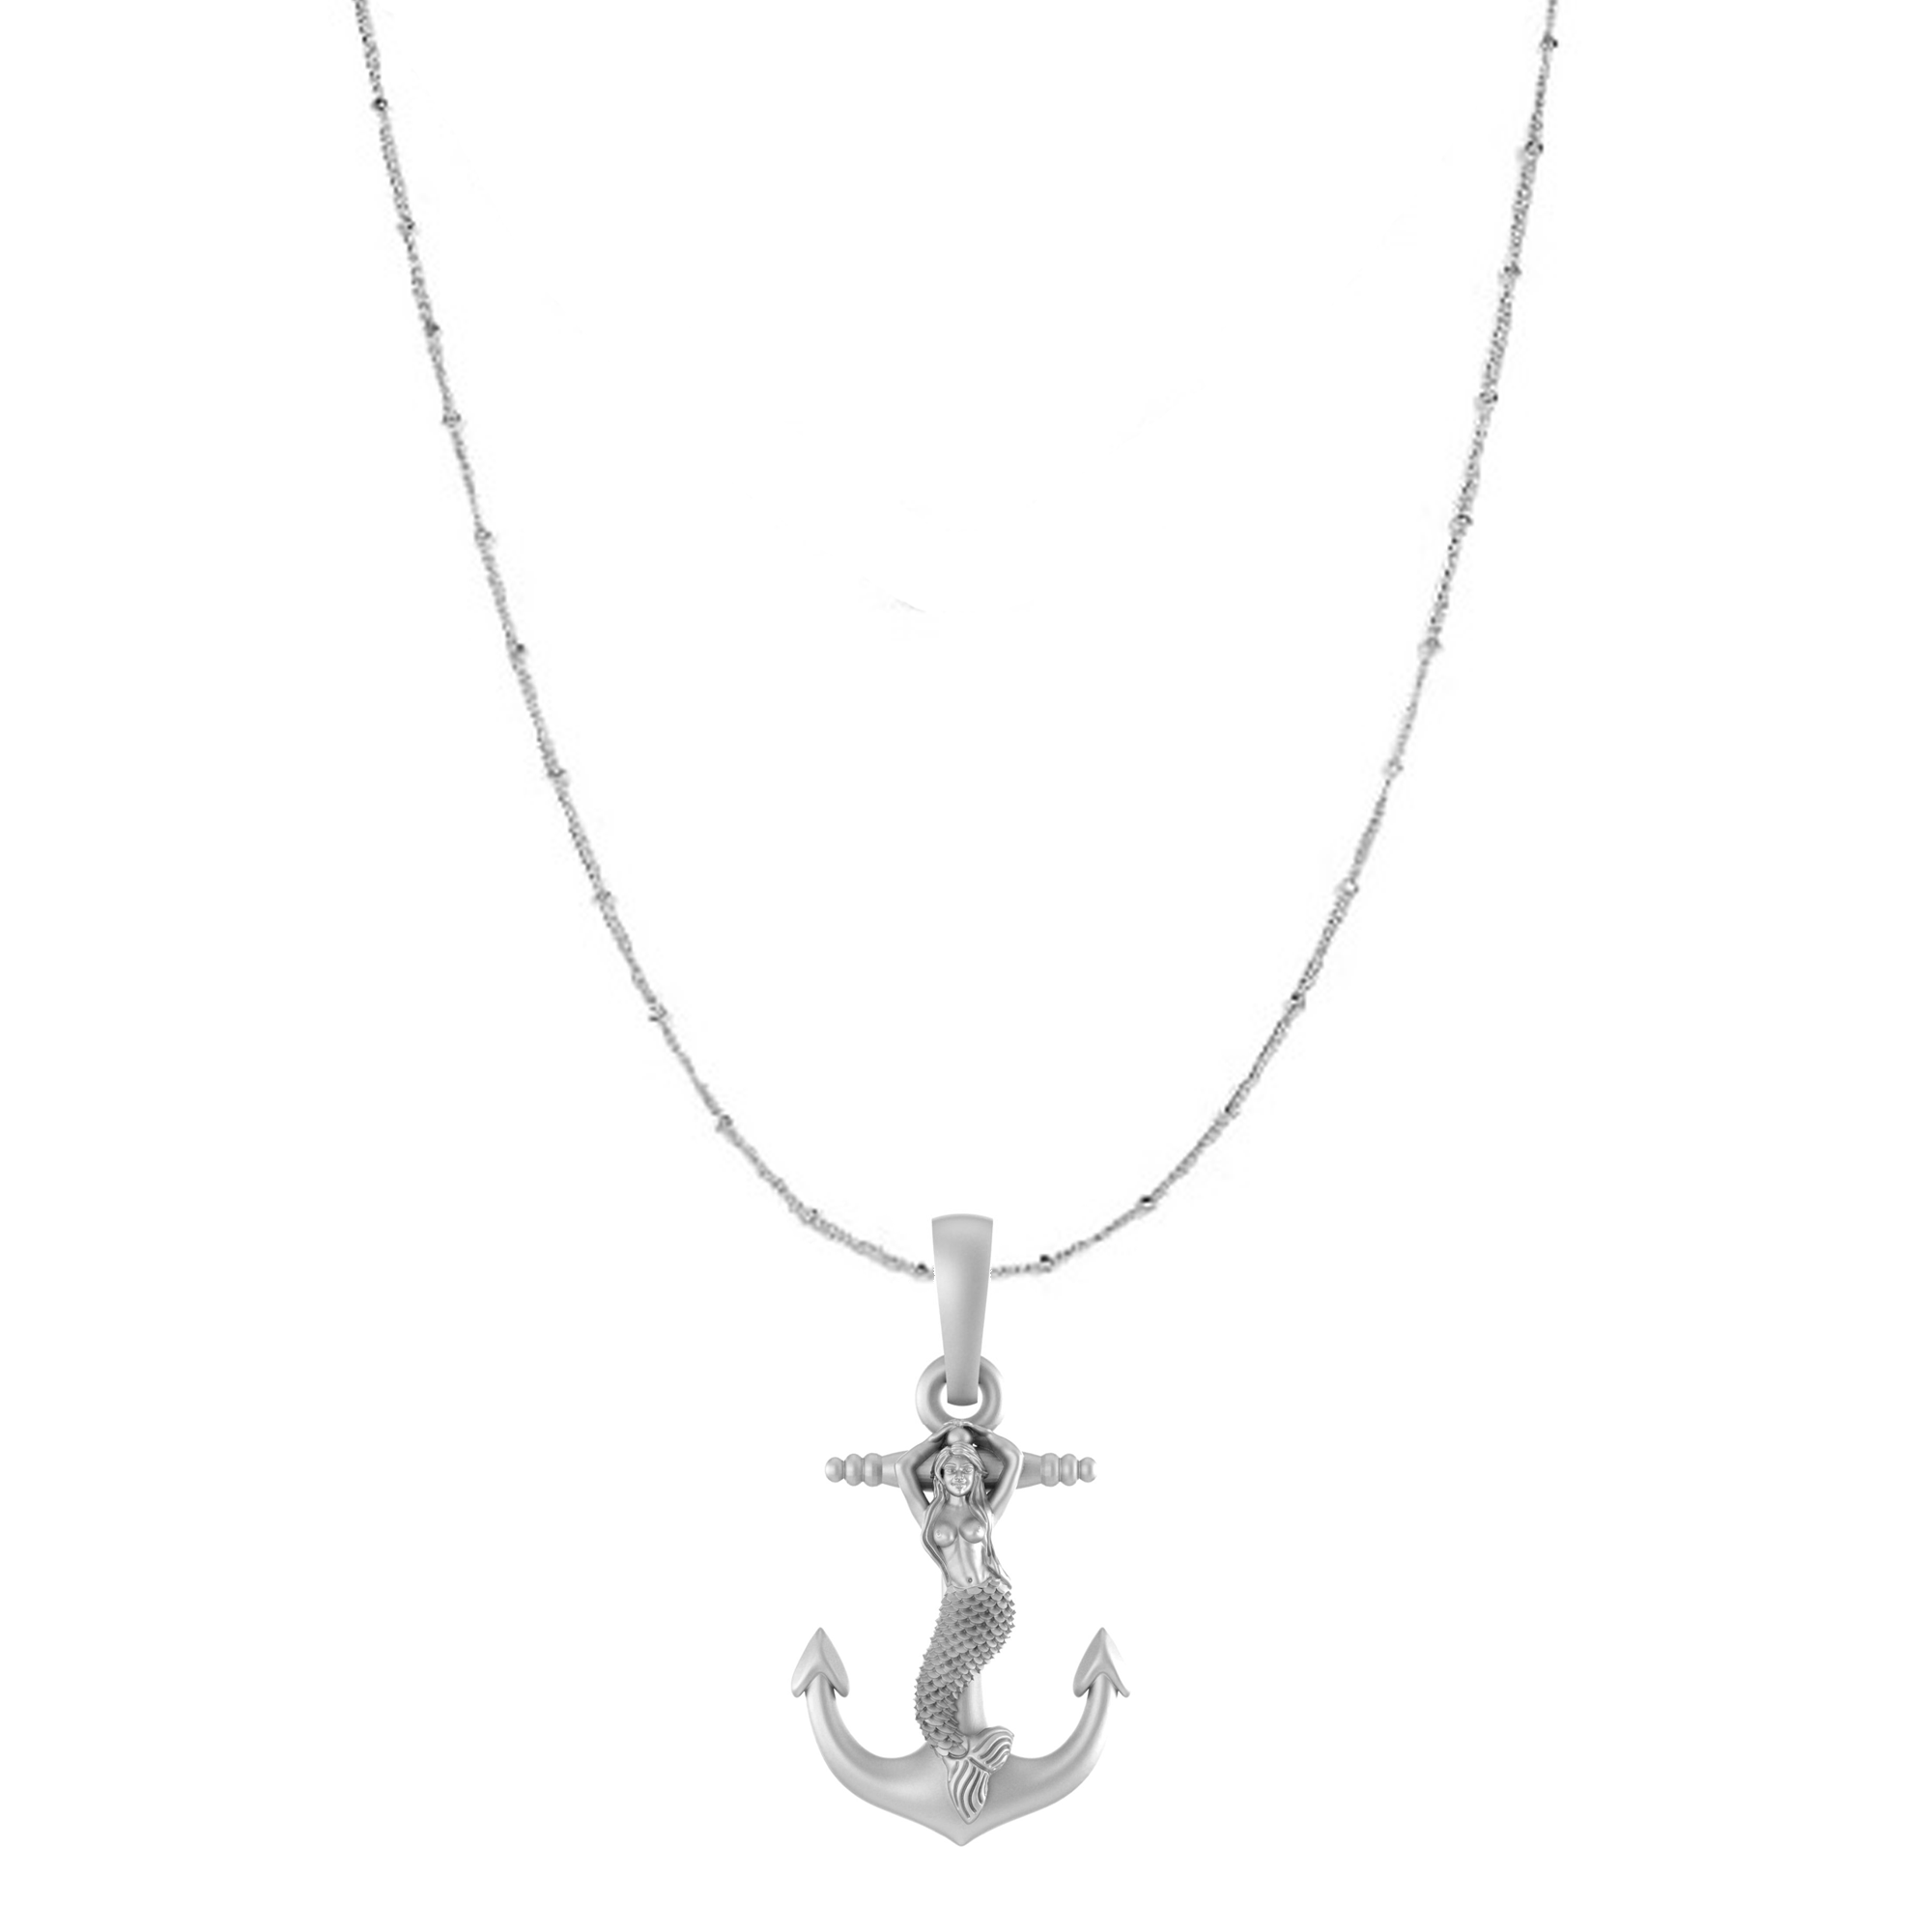 Akshat Sapphire Sterling Silver (92.5% purity) Ship Anchor Chain Pendant (Pendant with Ball/Beads Chain) for Men & Women Pure Silver Stylish and fashionable ship anchor chain Locket for Good Health & Wealth